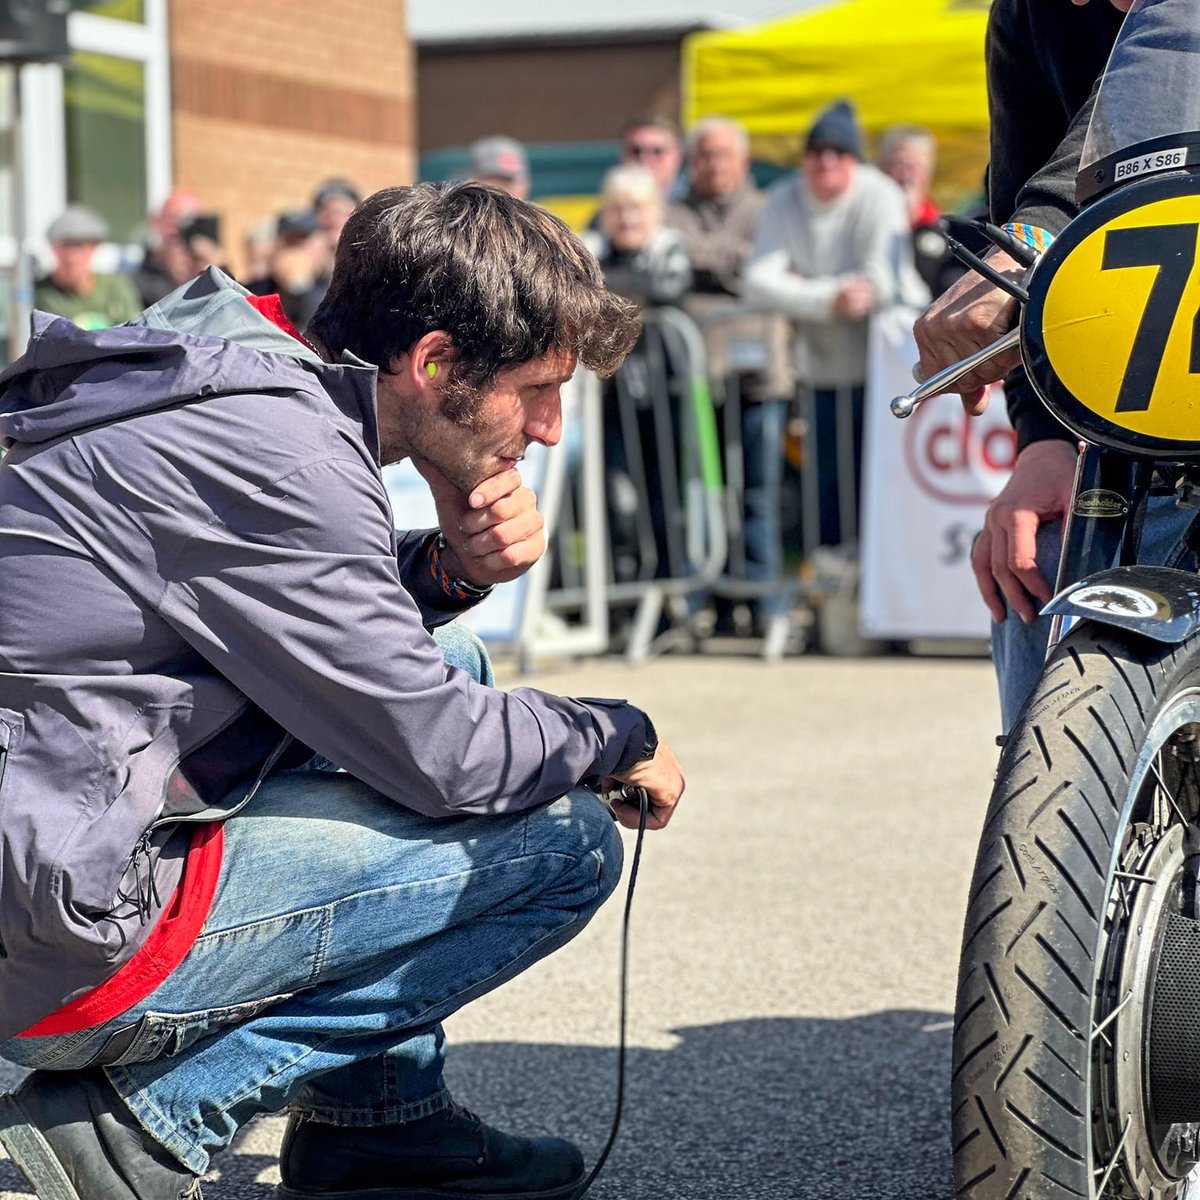 Did you attend the 2024 International Classic Motorcycle Show over the weekend? 
How was it? Send us some of your pics.
.
.
.
#wemoto #motorcycleparts #bikeshow